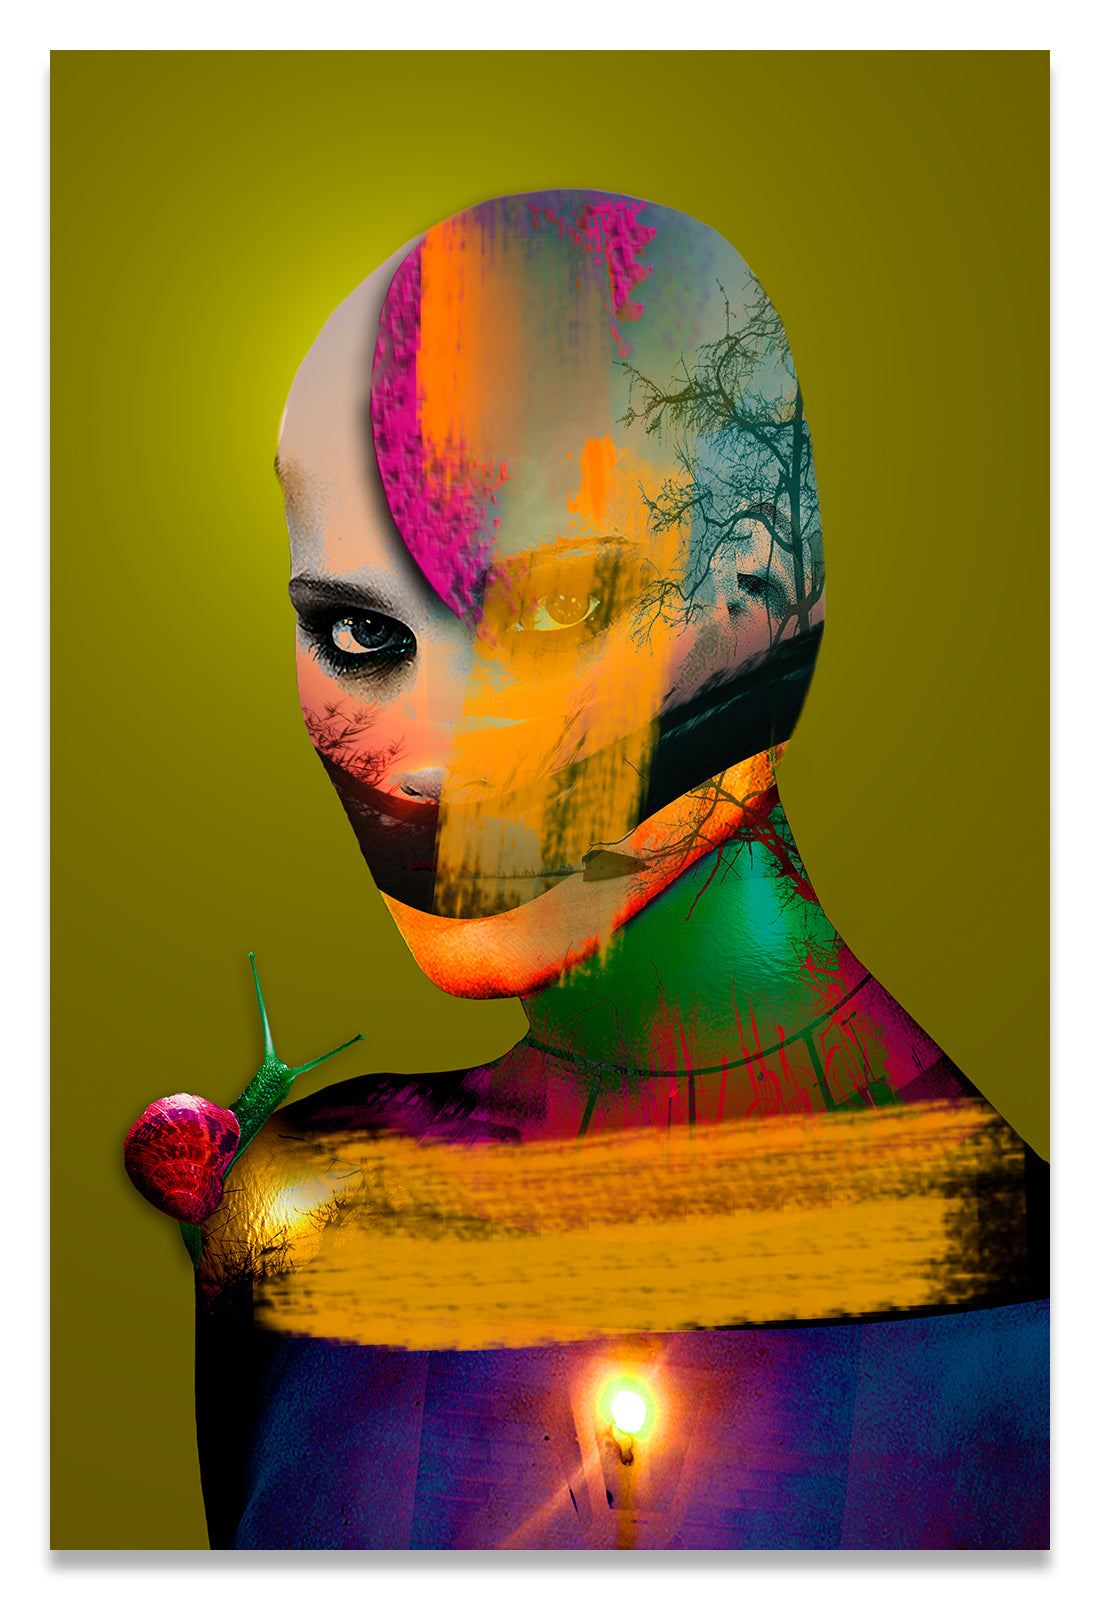 Bold Colored Portrait of a Bald Woman Covered in Paint with a Snail on her Shoulder.